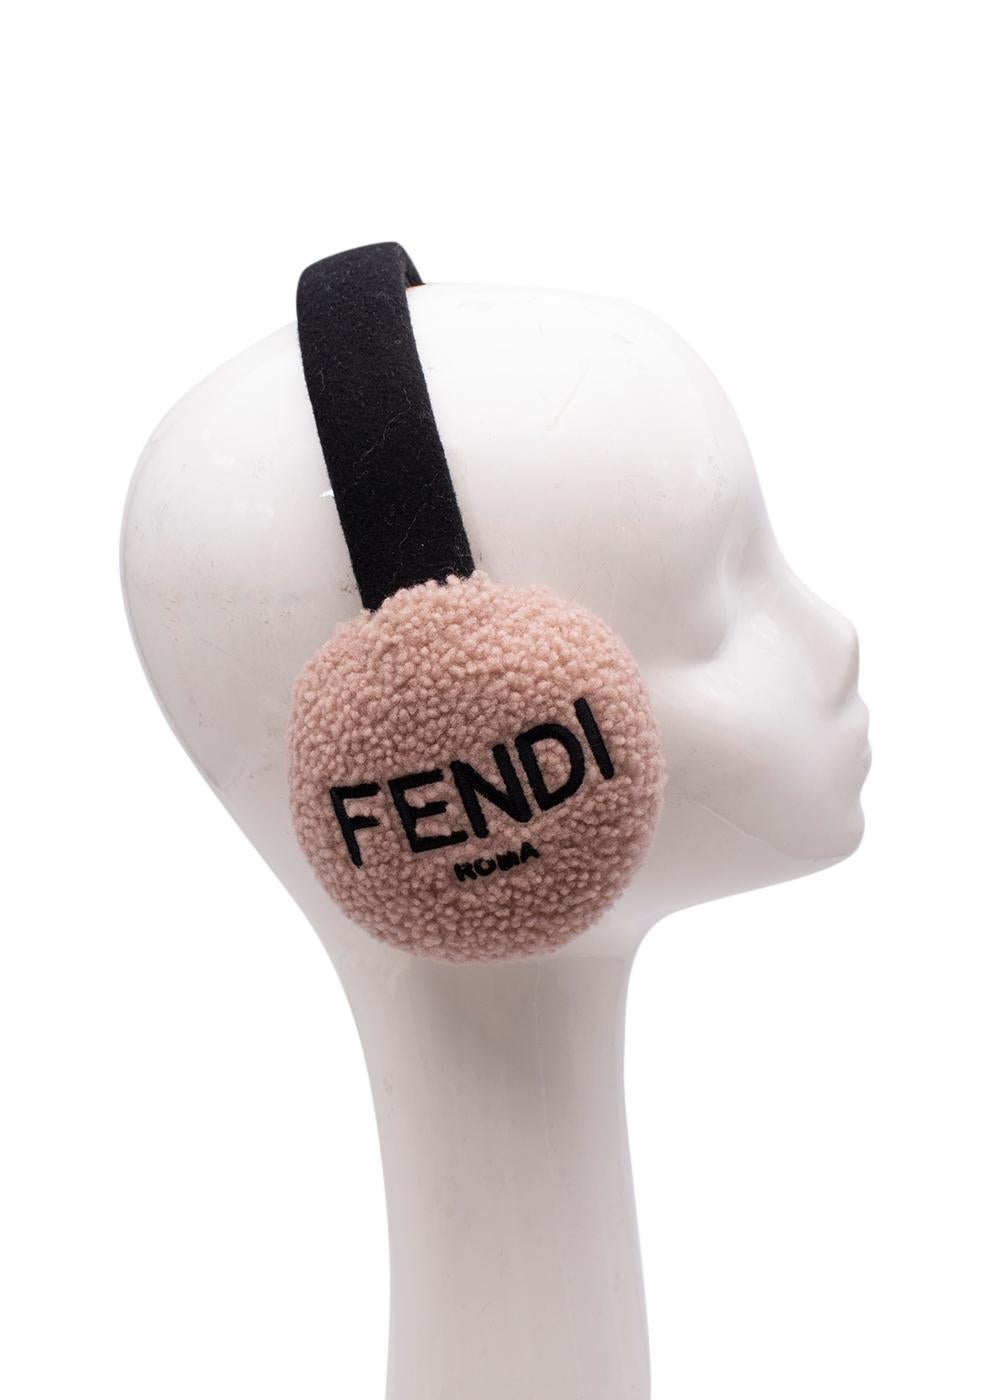 Fendi Blush Shearling Logo Embroidered Ear Muffs

- Padded shearling ear pads embroidered with the house logo 
- Flexible fabric-covered headbamd 

Materials:
Wool felt
Shearling 

Made in Italy 
Specialist clean only 

Ear pad width: 11cm
Ear pad